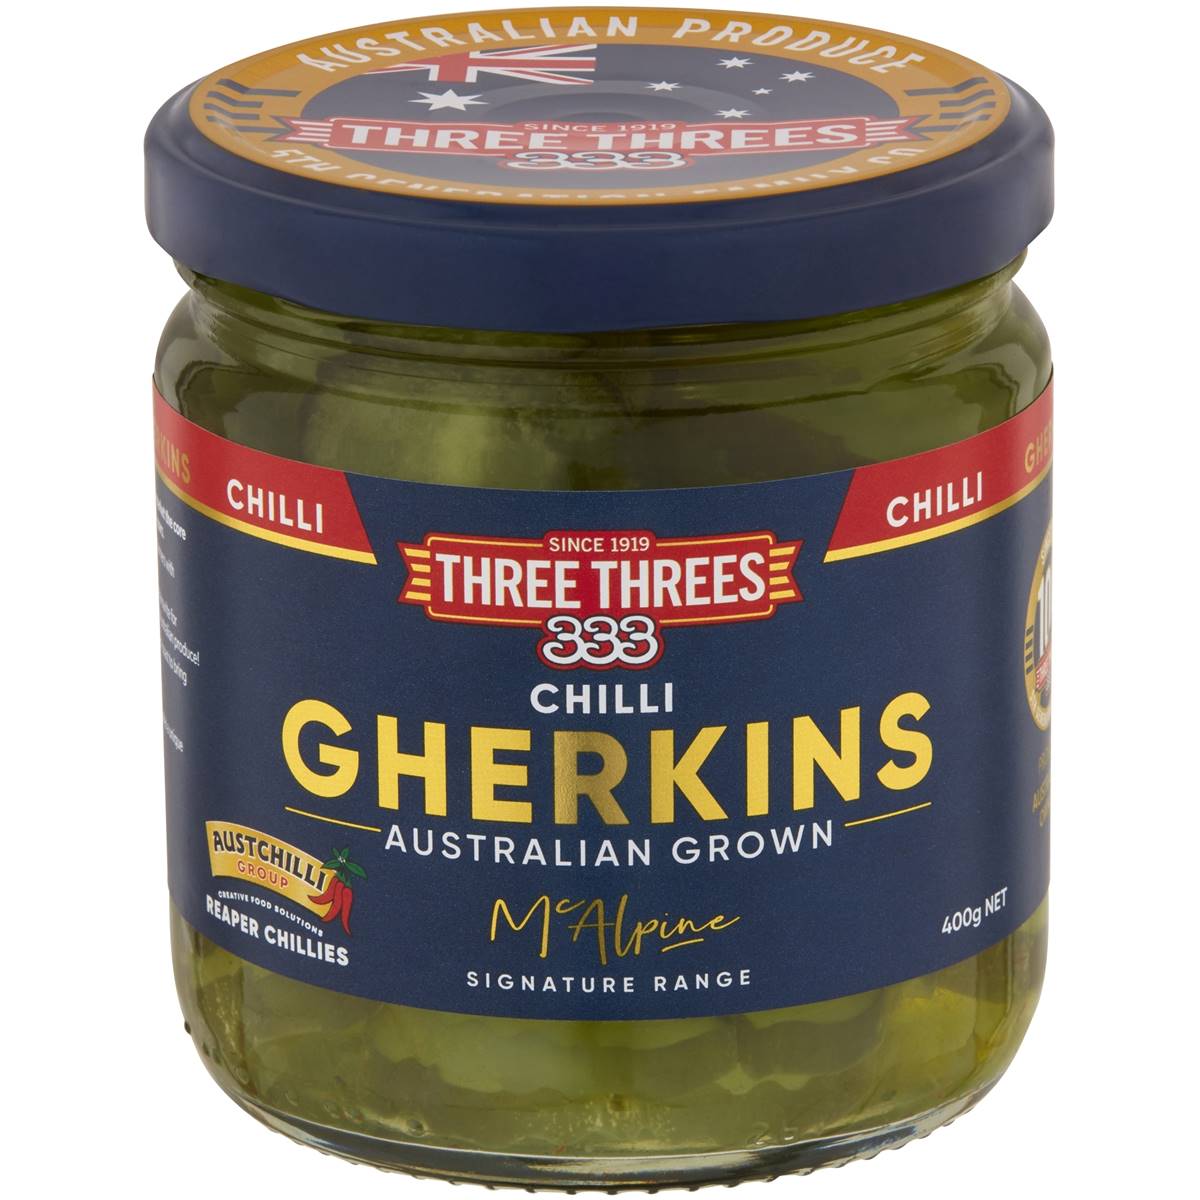 Calories in Three Threes Chilli Gherkins